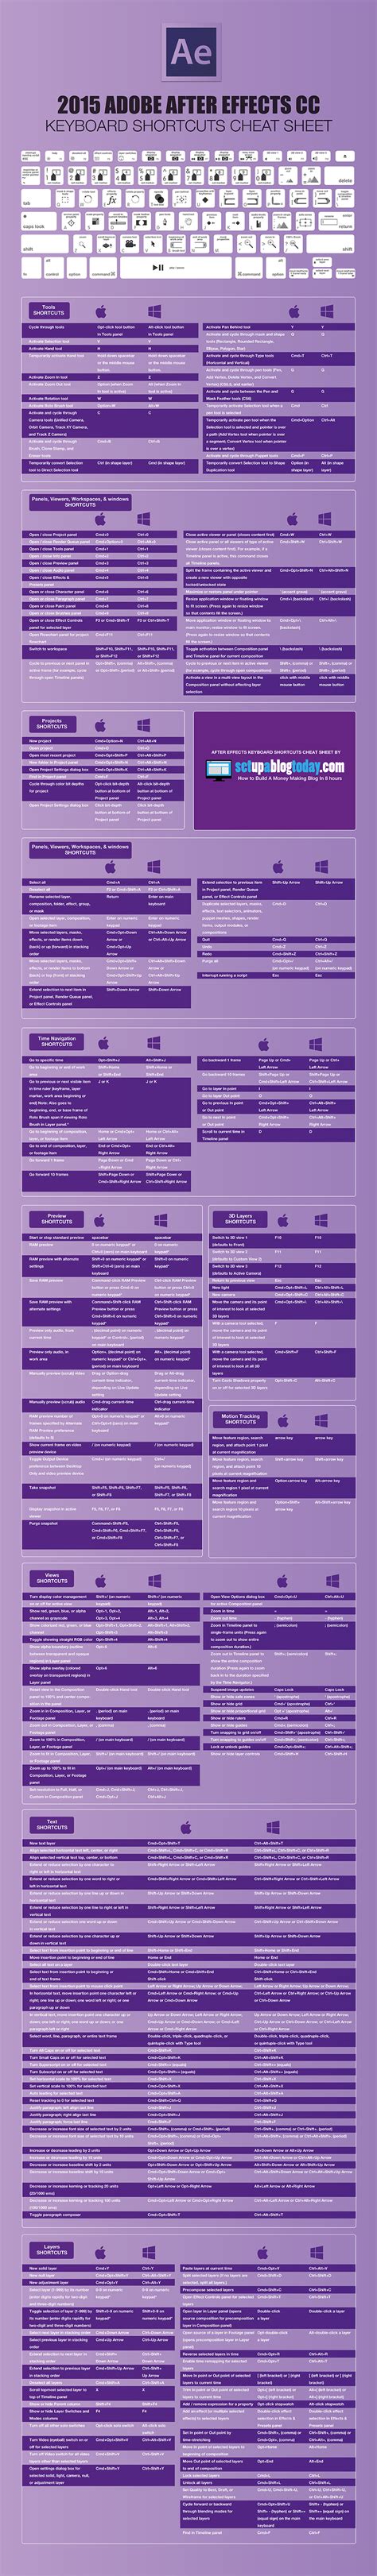 official digitalero view topic shortcuts sheets blender photoshop aftereffects and more